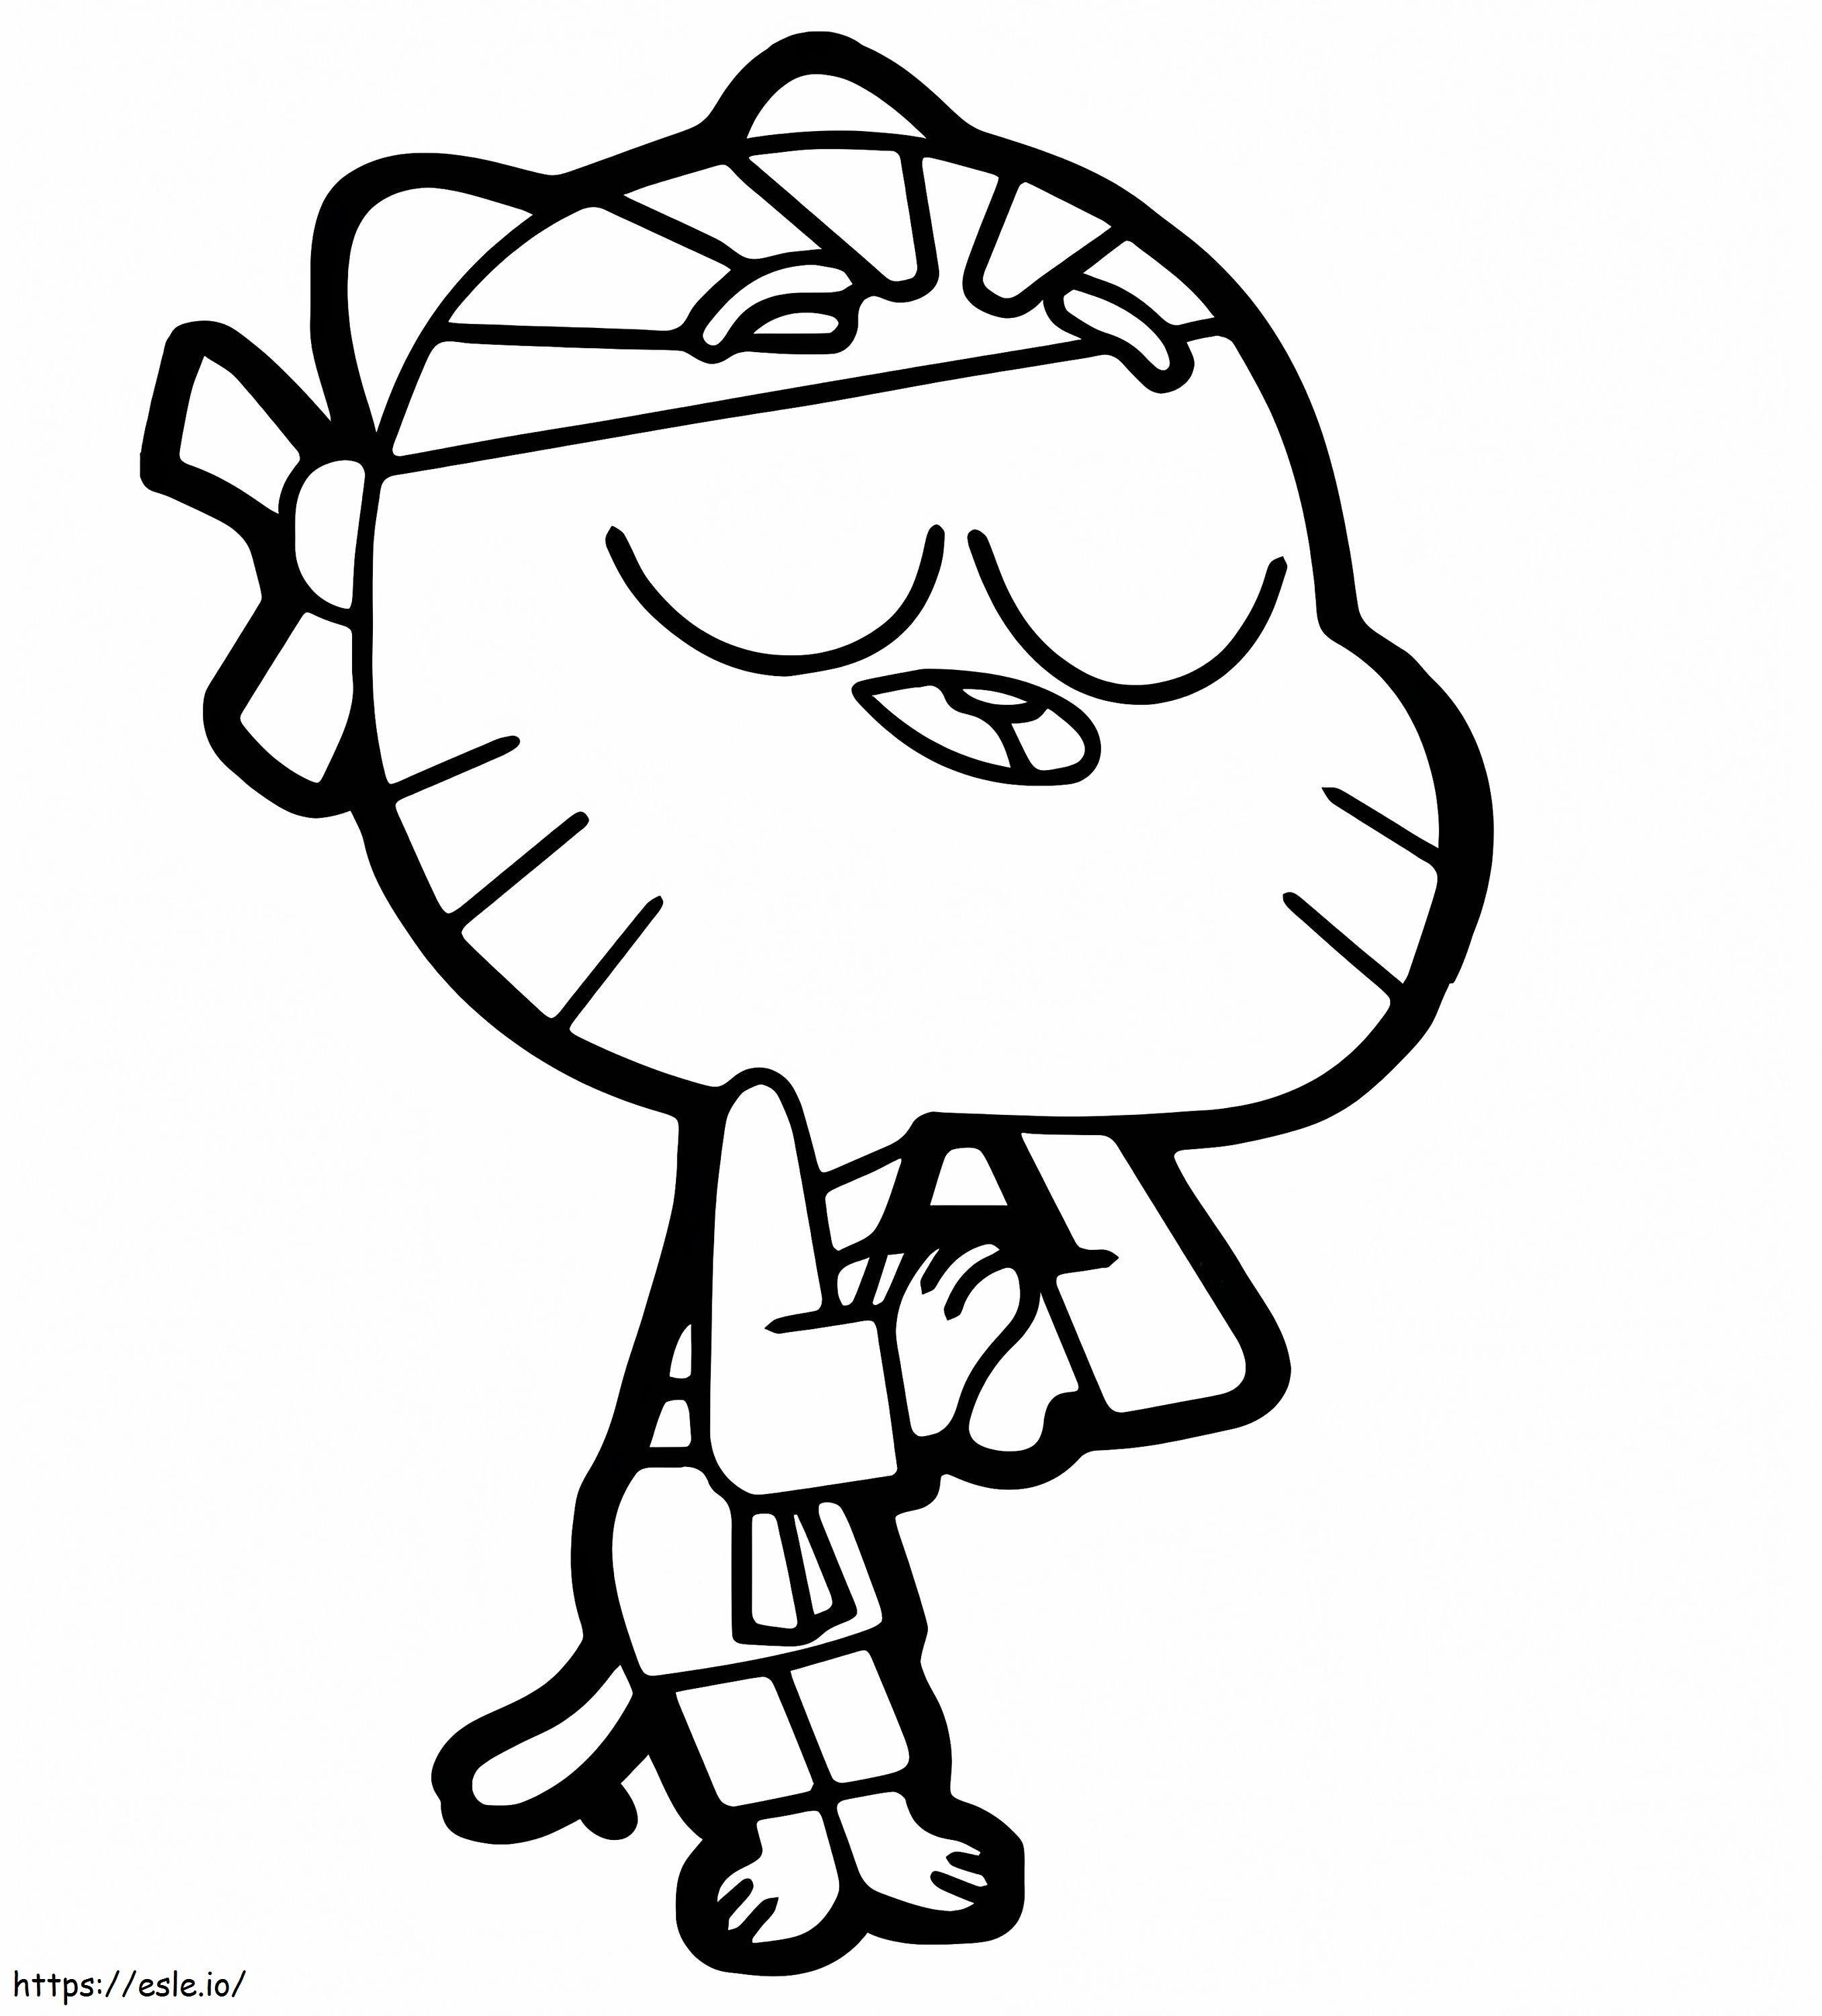 1570525210 Karate Bow Gumball coloring page